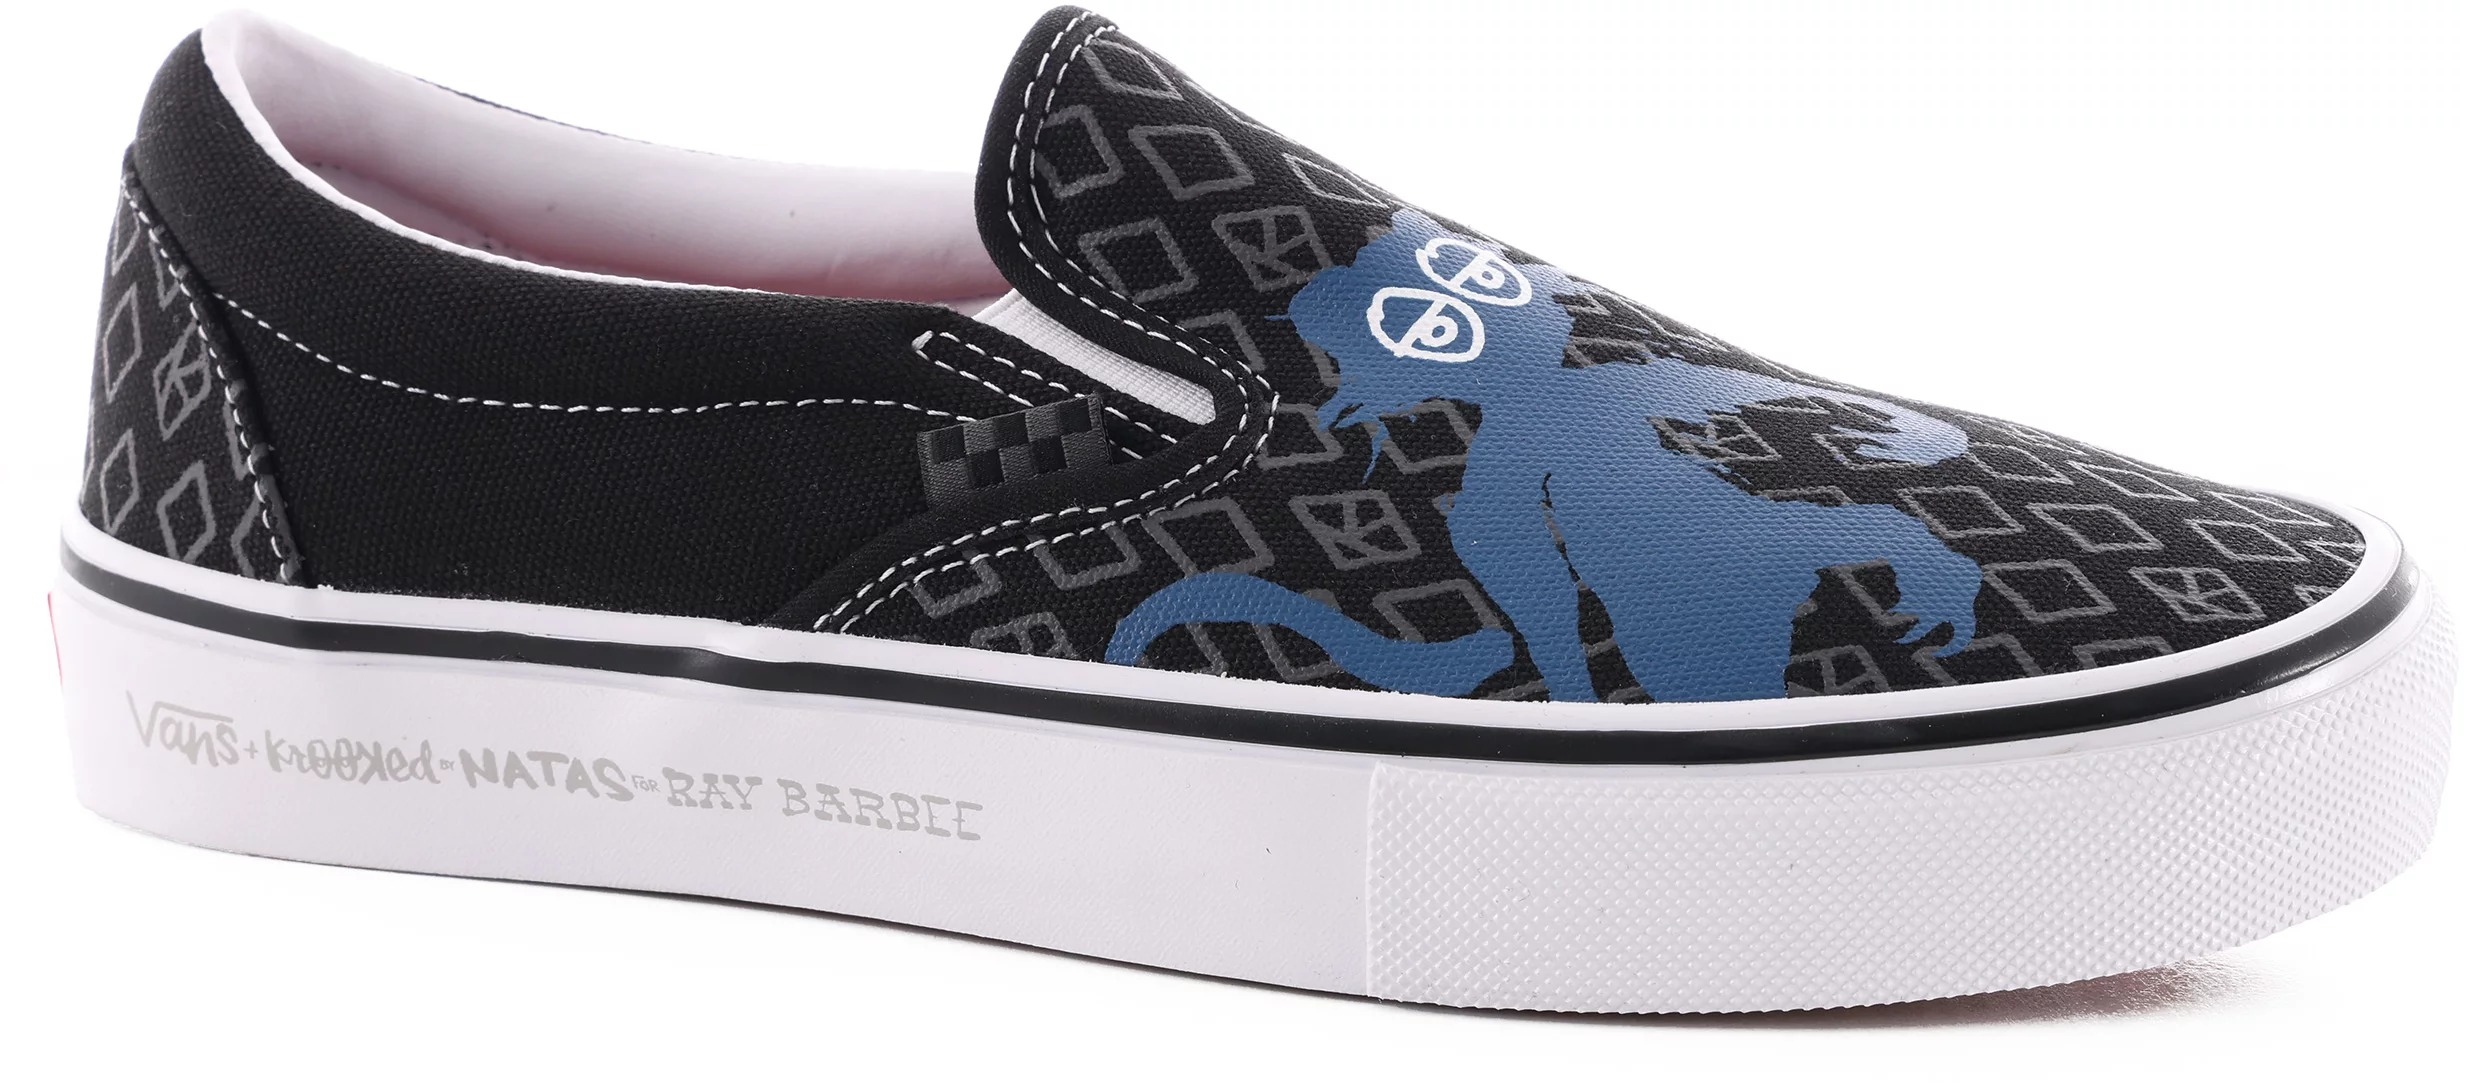 Vans Skate Slip-On Shoes - (krooked by natas for ray) black | Tactics